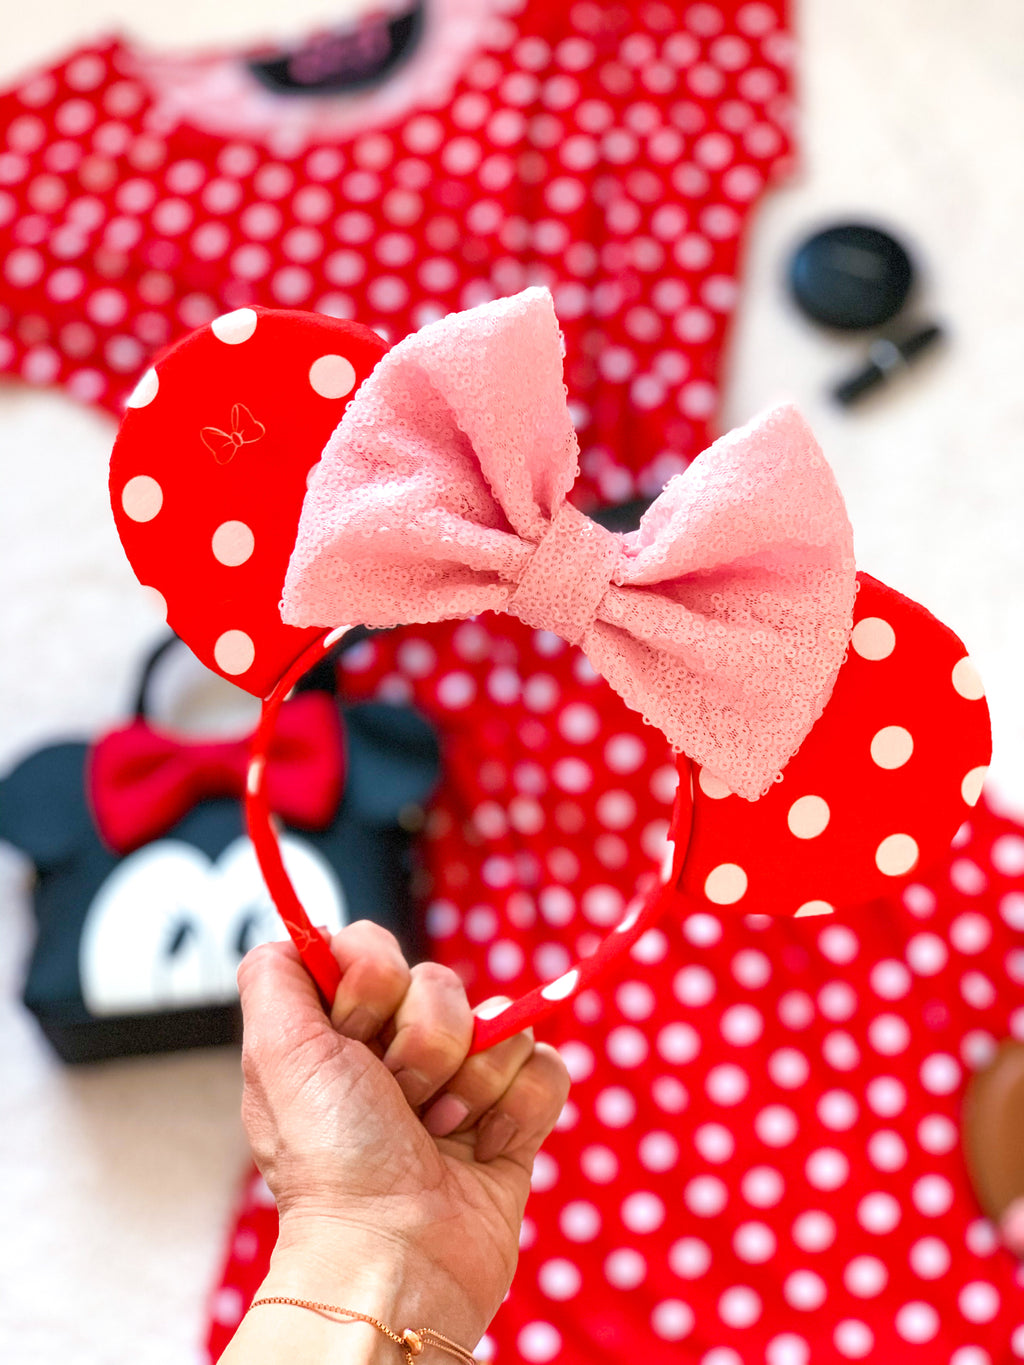 Disney Inspired Minnie Mouse Red Polka Dot Ears